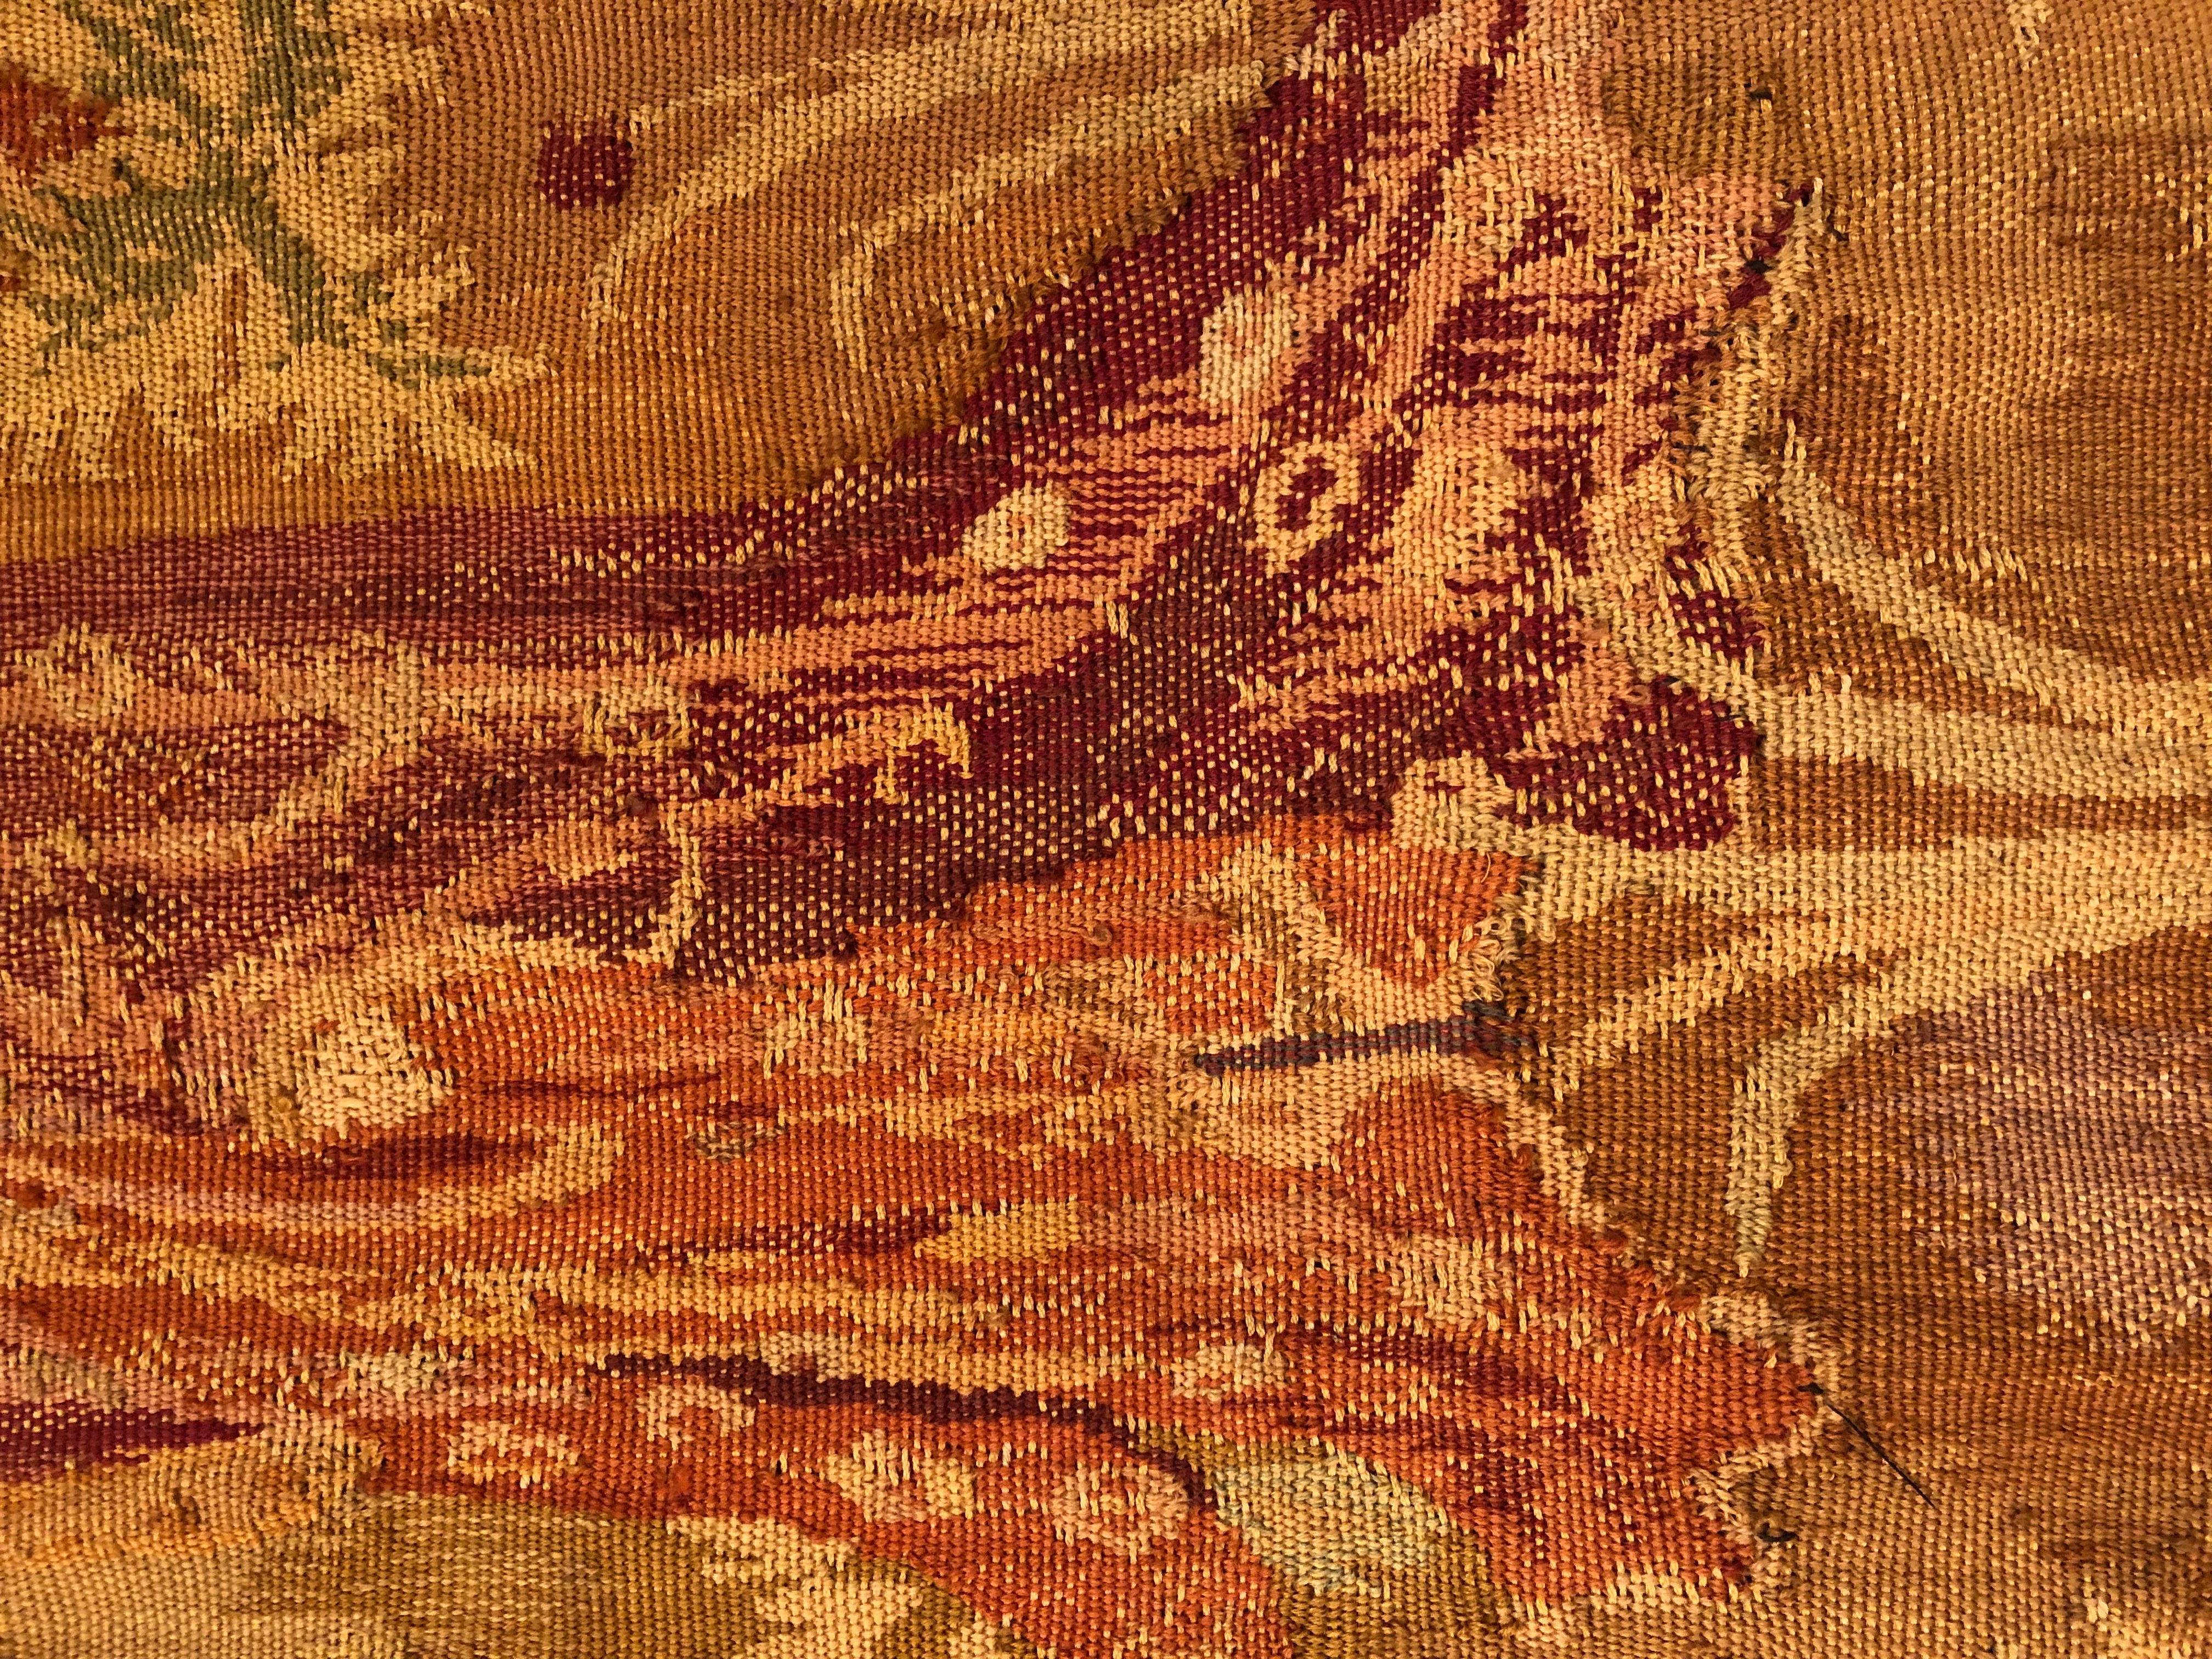 Gorgeous Intricately Detailed 19th Century Tapestry in Warm Autumn Tones For Sale 7